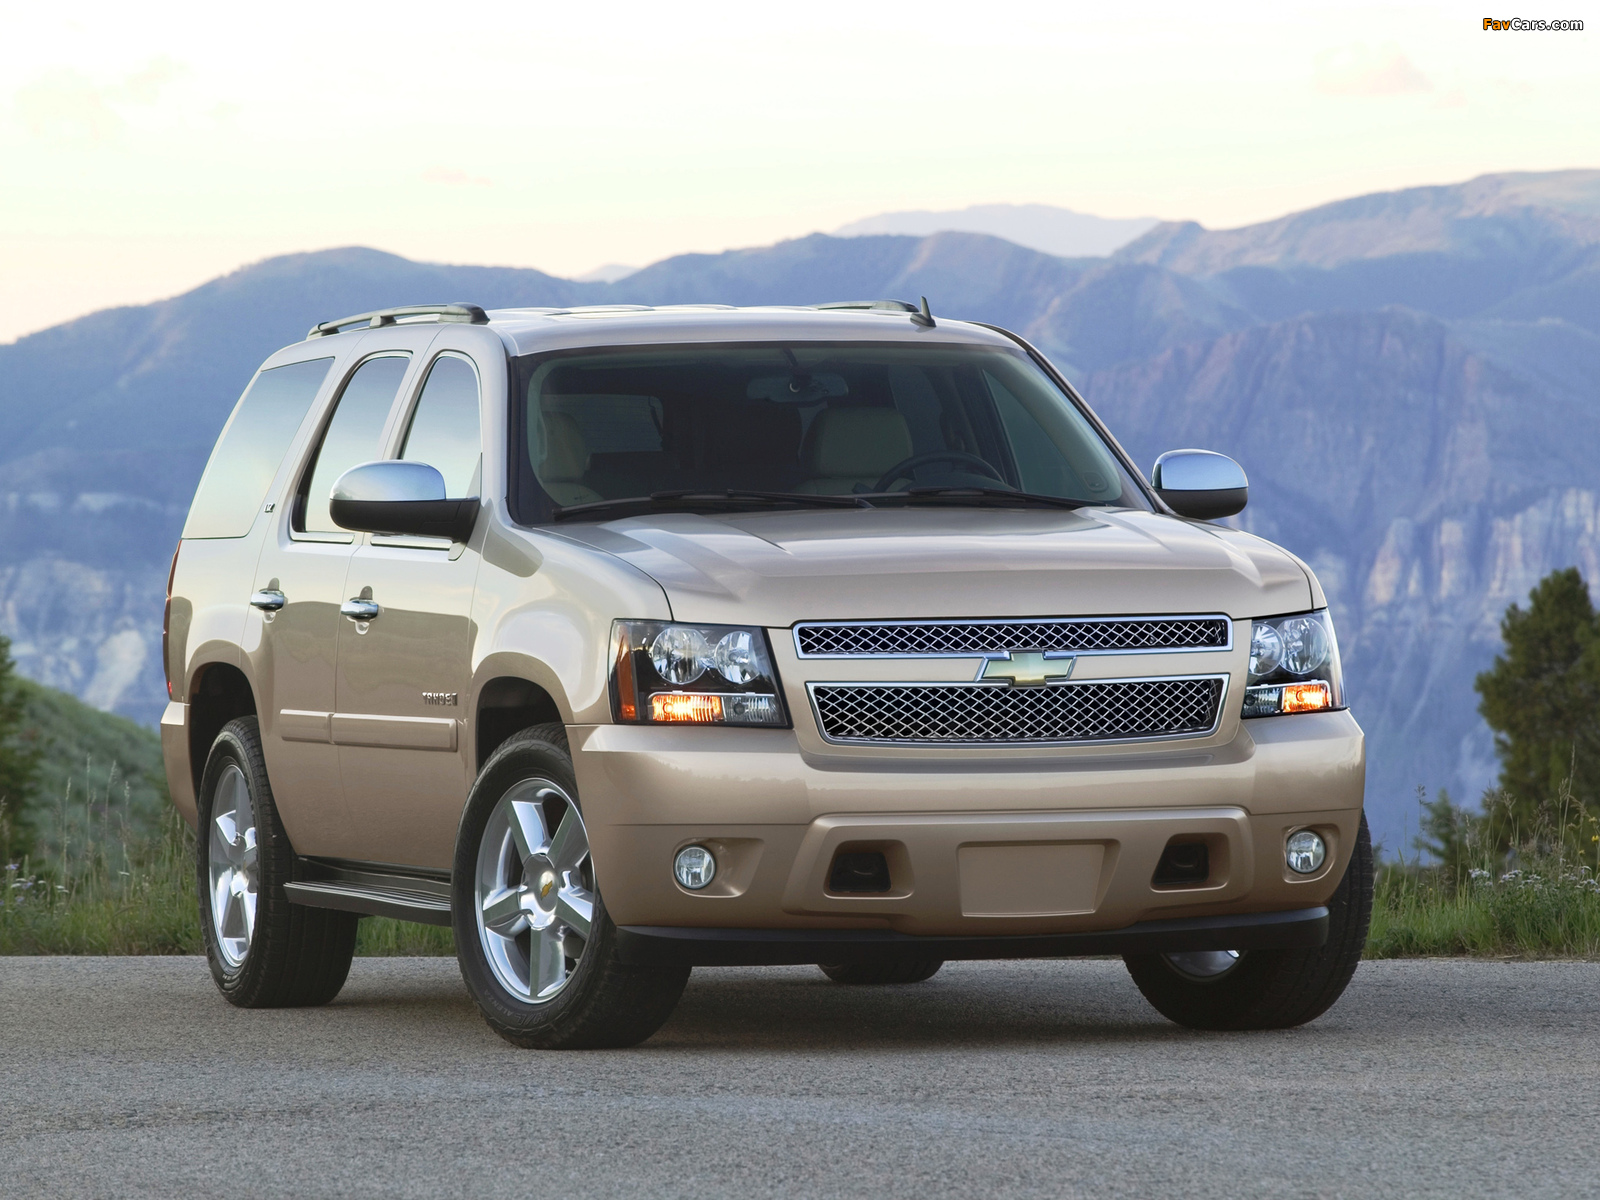 Chevrolet Tahoe (GMT900) 2006 pictures (1600 x 1200)